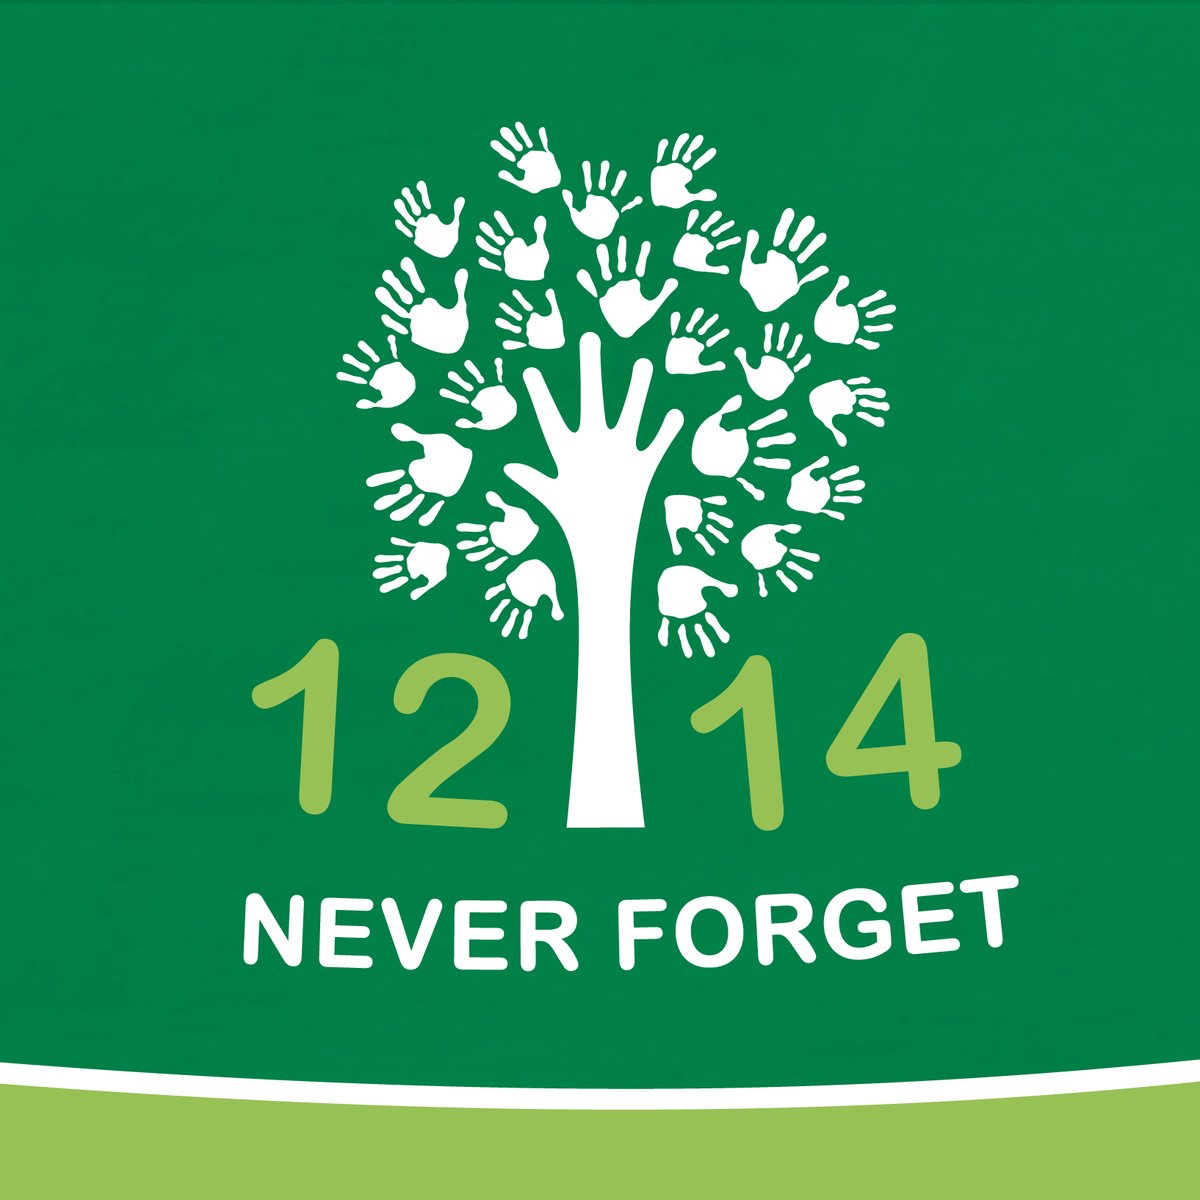 11 years ago today, 20 first-graders and 6 educators were killed in a tragic mass shooting at Sandy Hook Elementary School in Newtown, Connecticut. In remembrance of the precious lives taken on 12/14/12 #NeverForget. #HonorWithAction #ProtectOurKids #SHPAction #SandyHookPromise